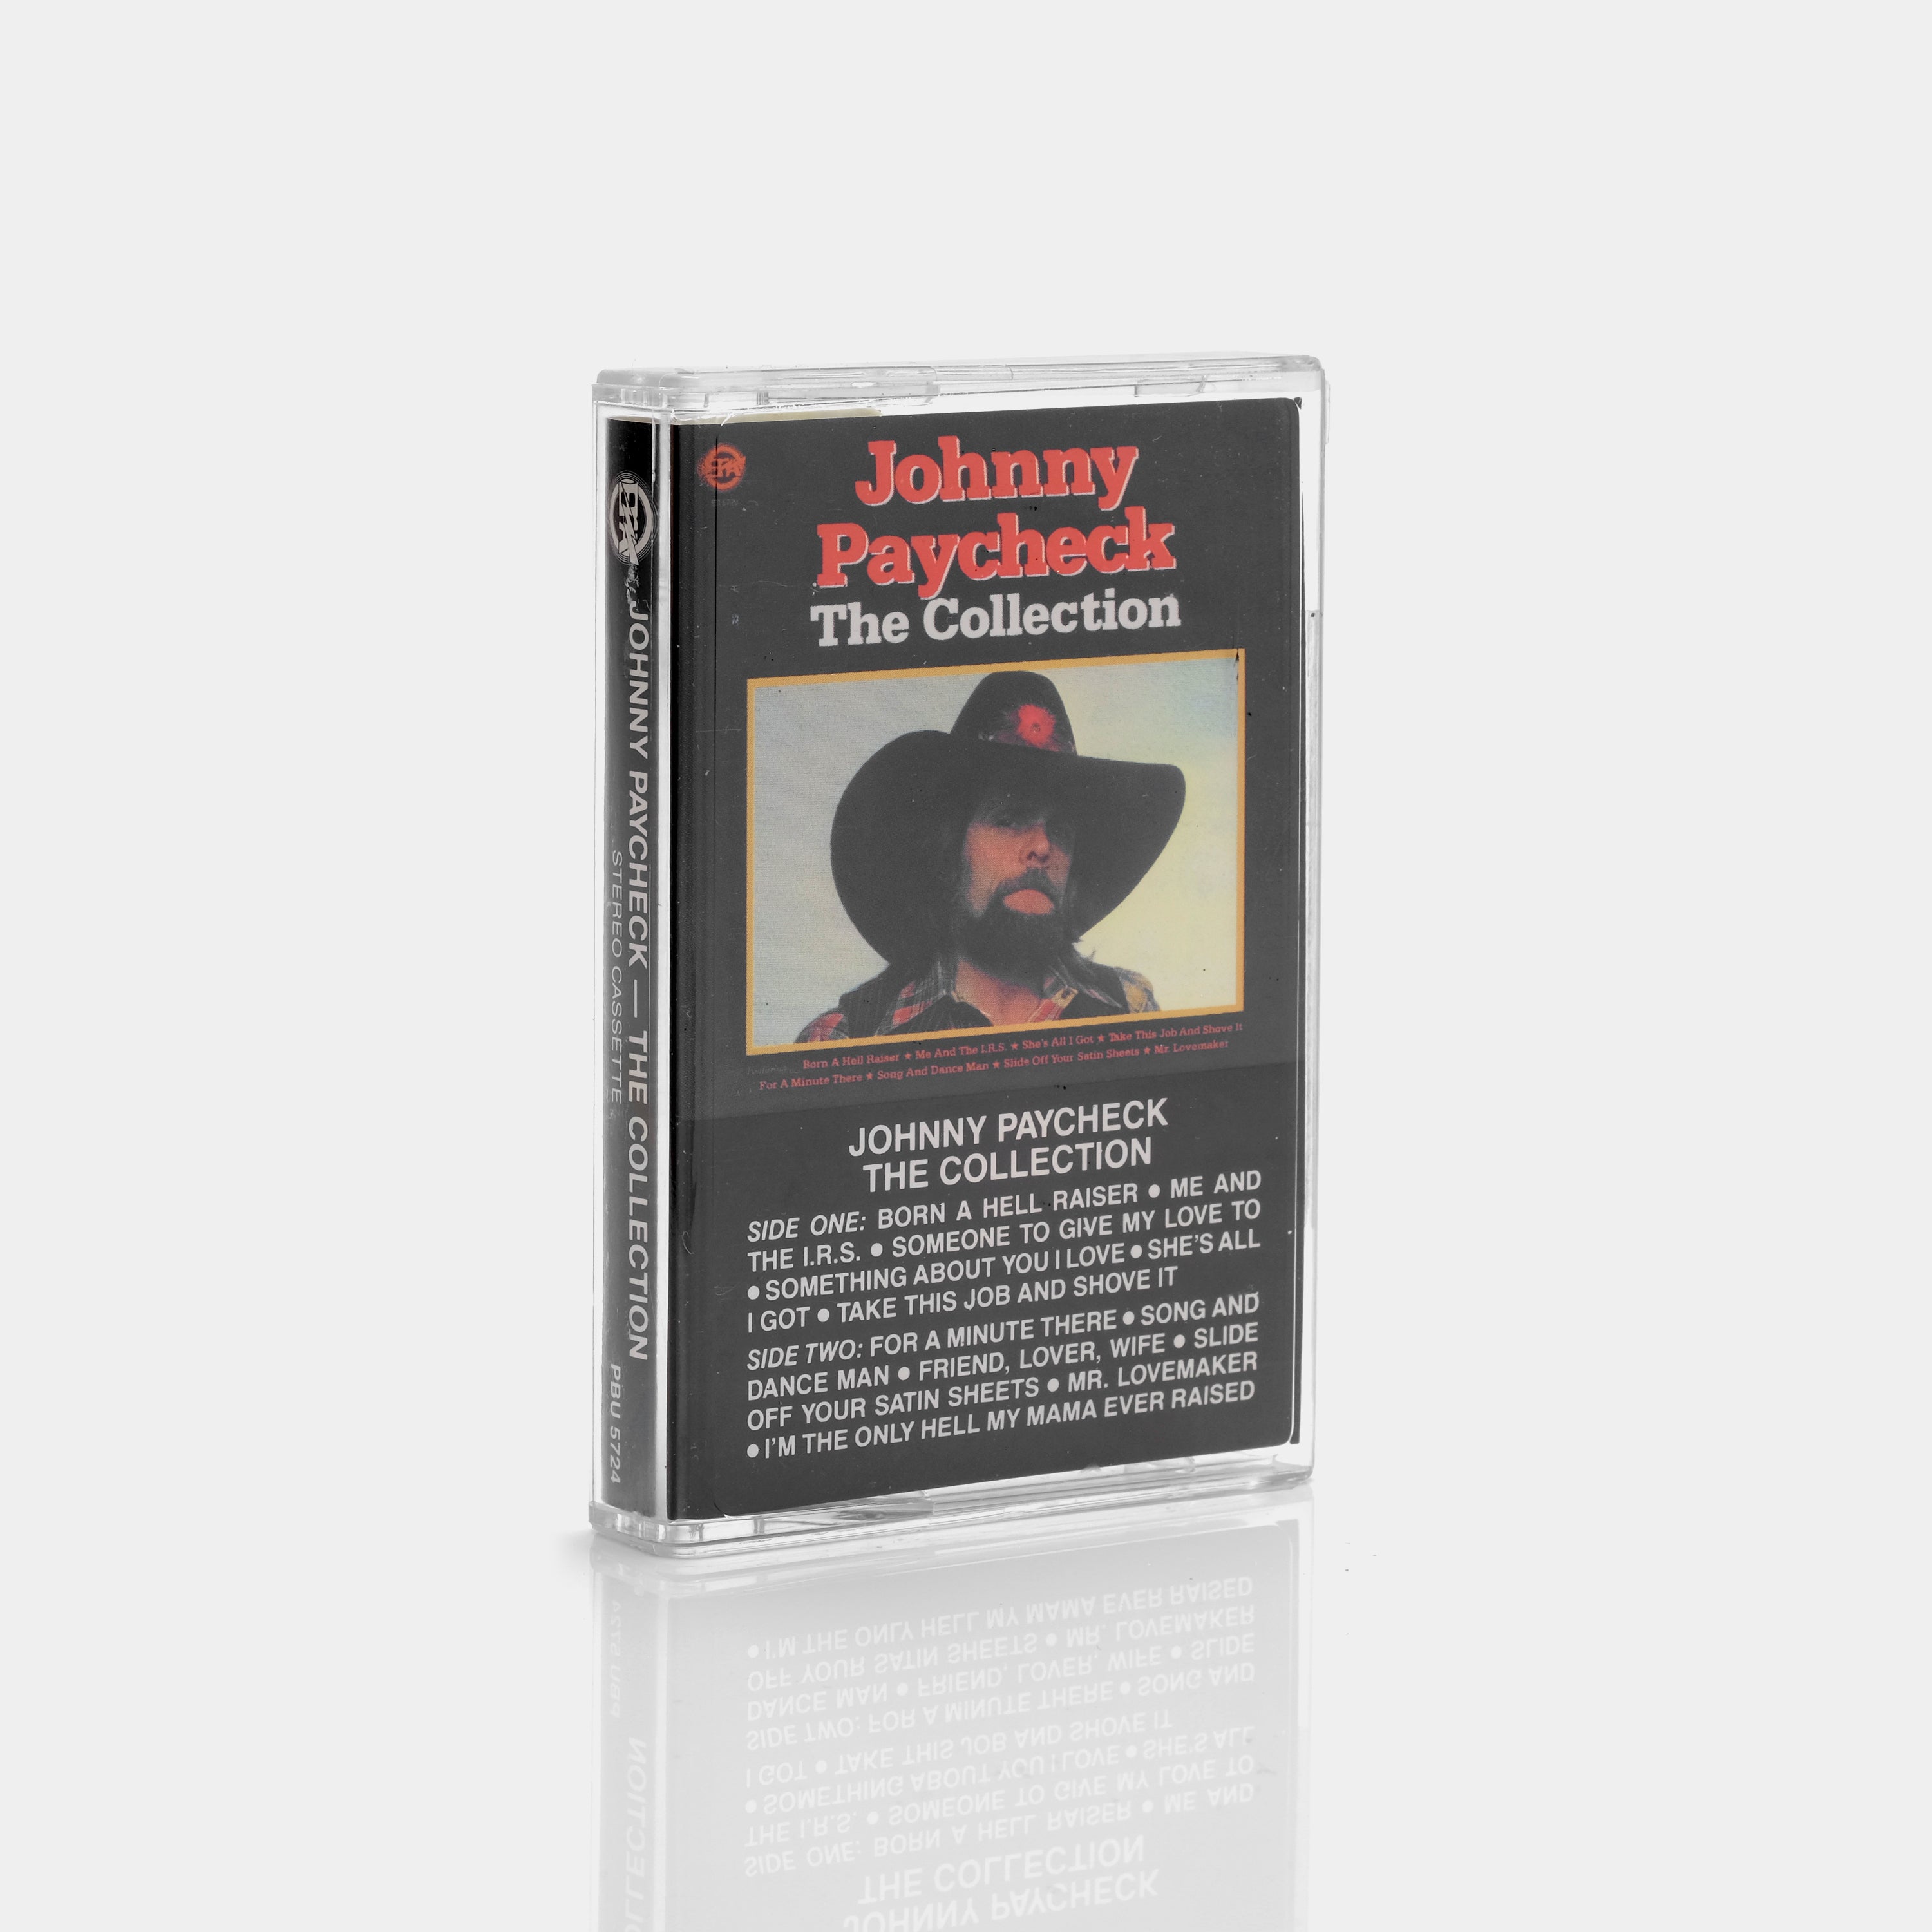 Johnny Paycheck - The Collection Cassette Tape